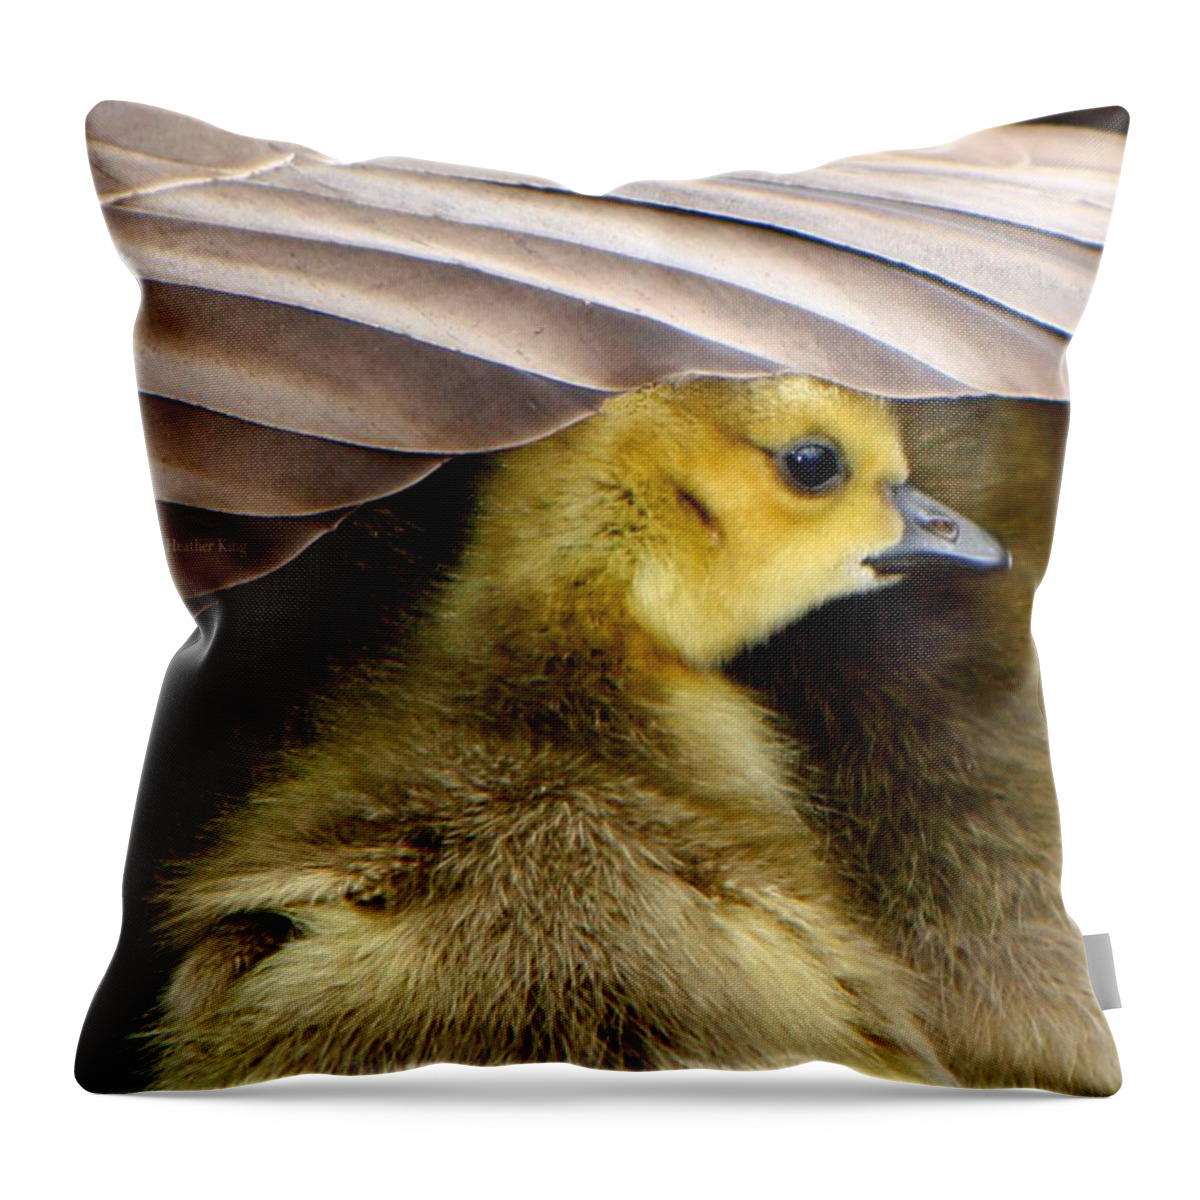 Canadian Goose Throw Pillow featuring the photograph My Umbrella by Heather King